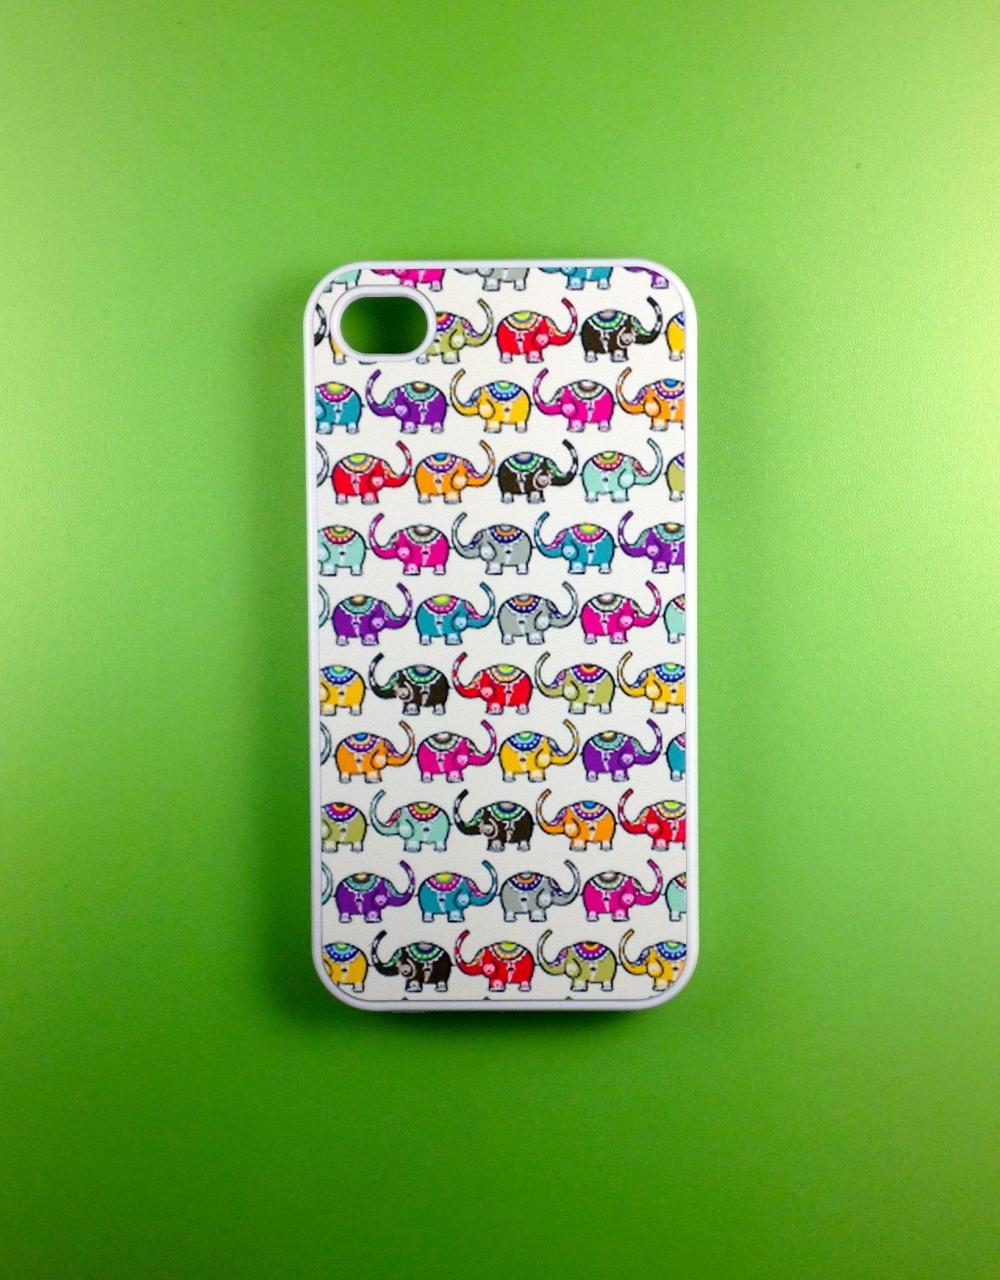 Iphone 4 Case - Elephants Iphone 4s Case, Iphone Case, Iphone 4 Cover